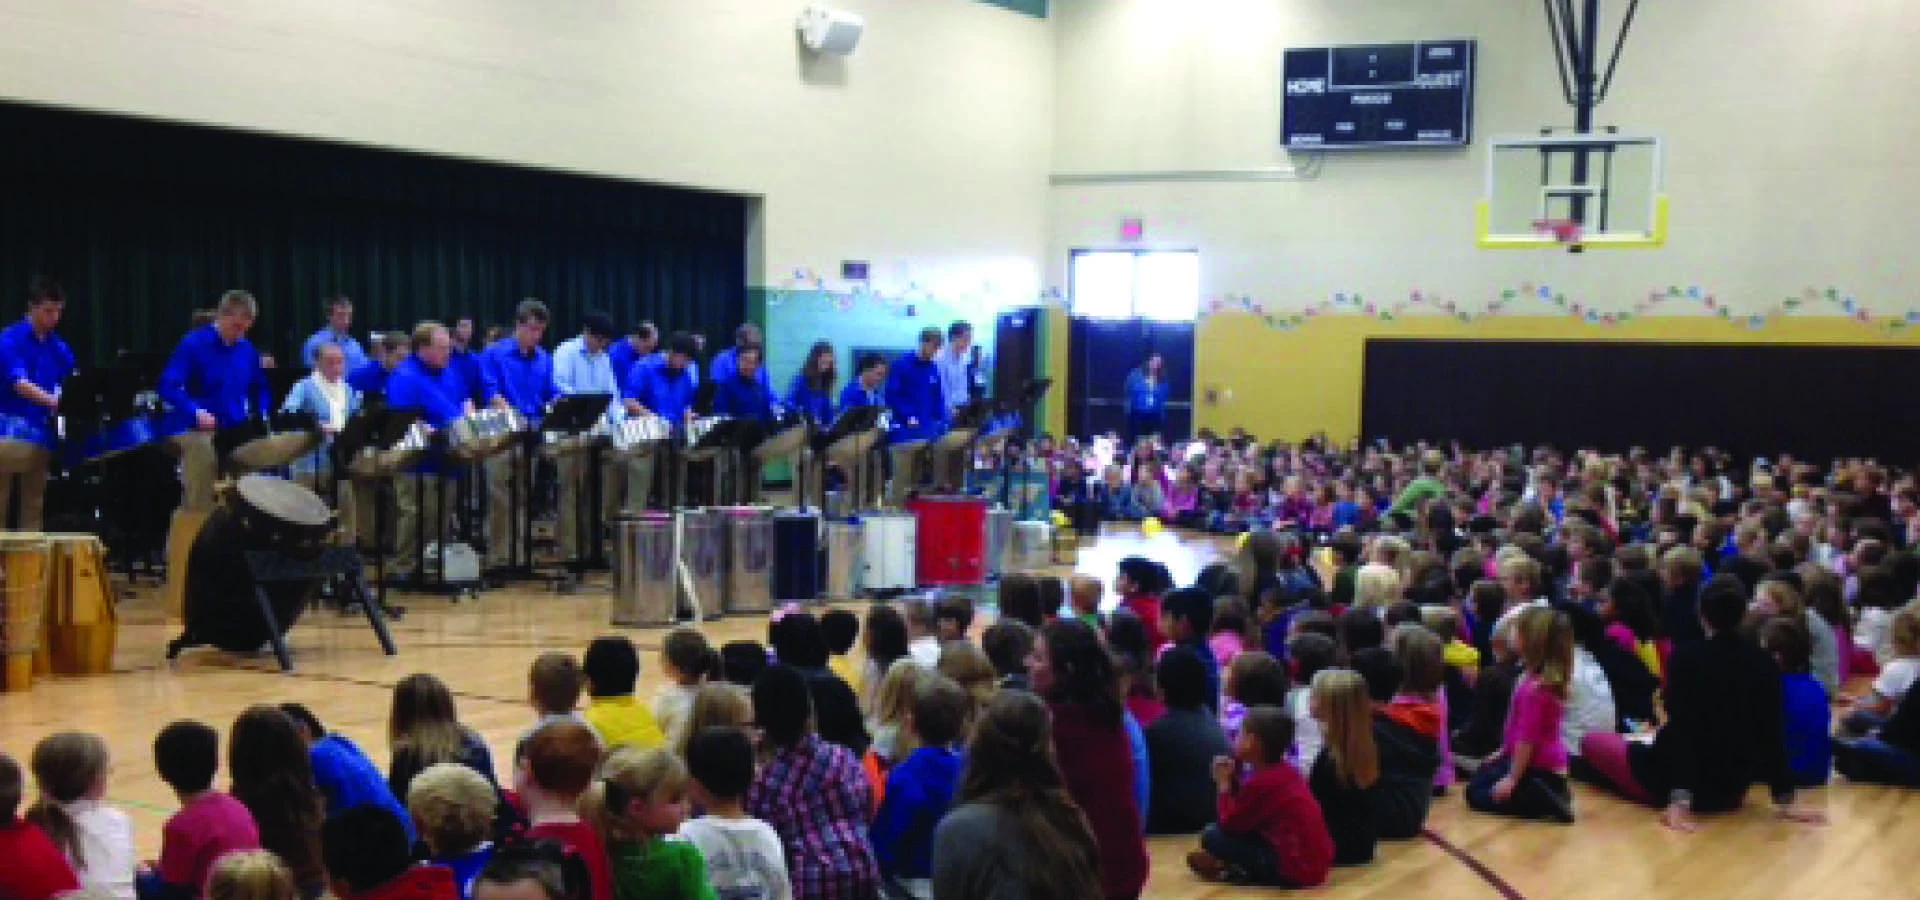 percussion students perform at elementary school gymnasium